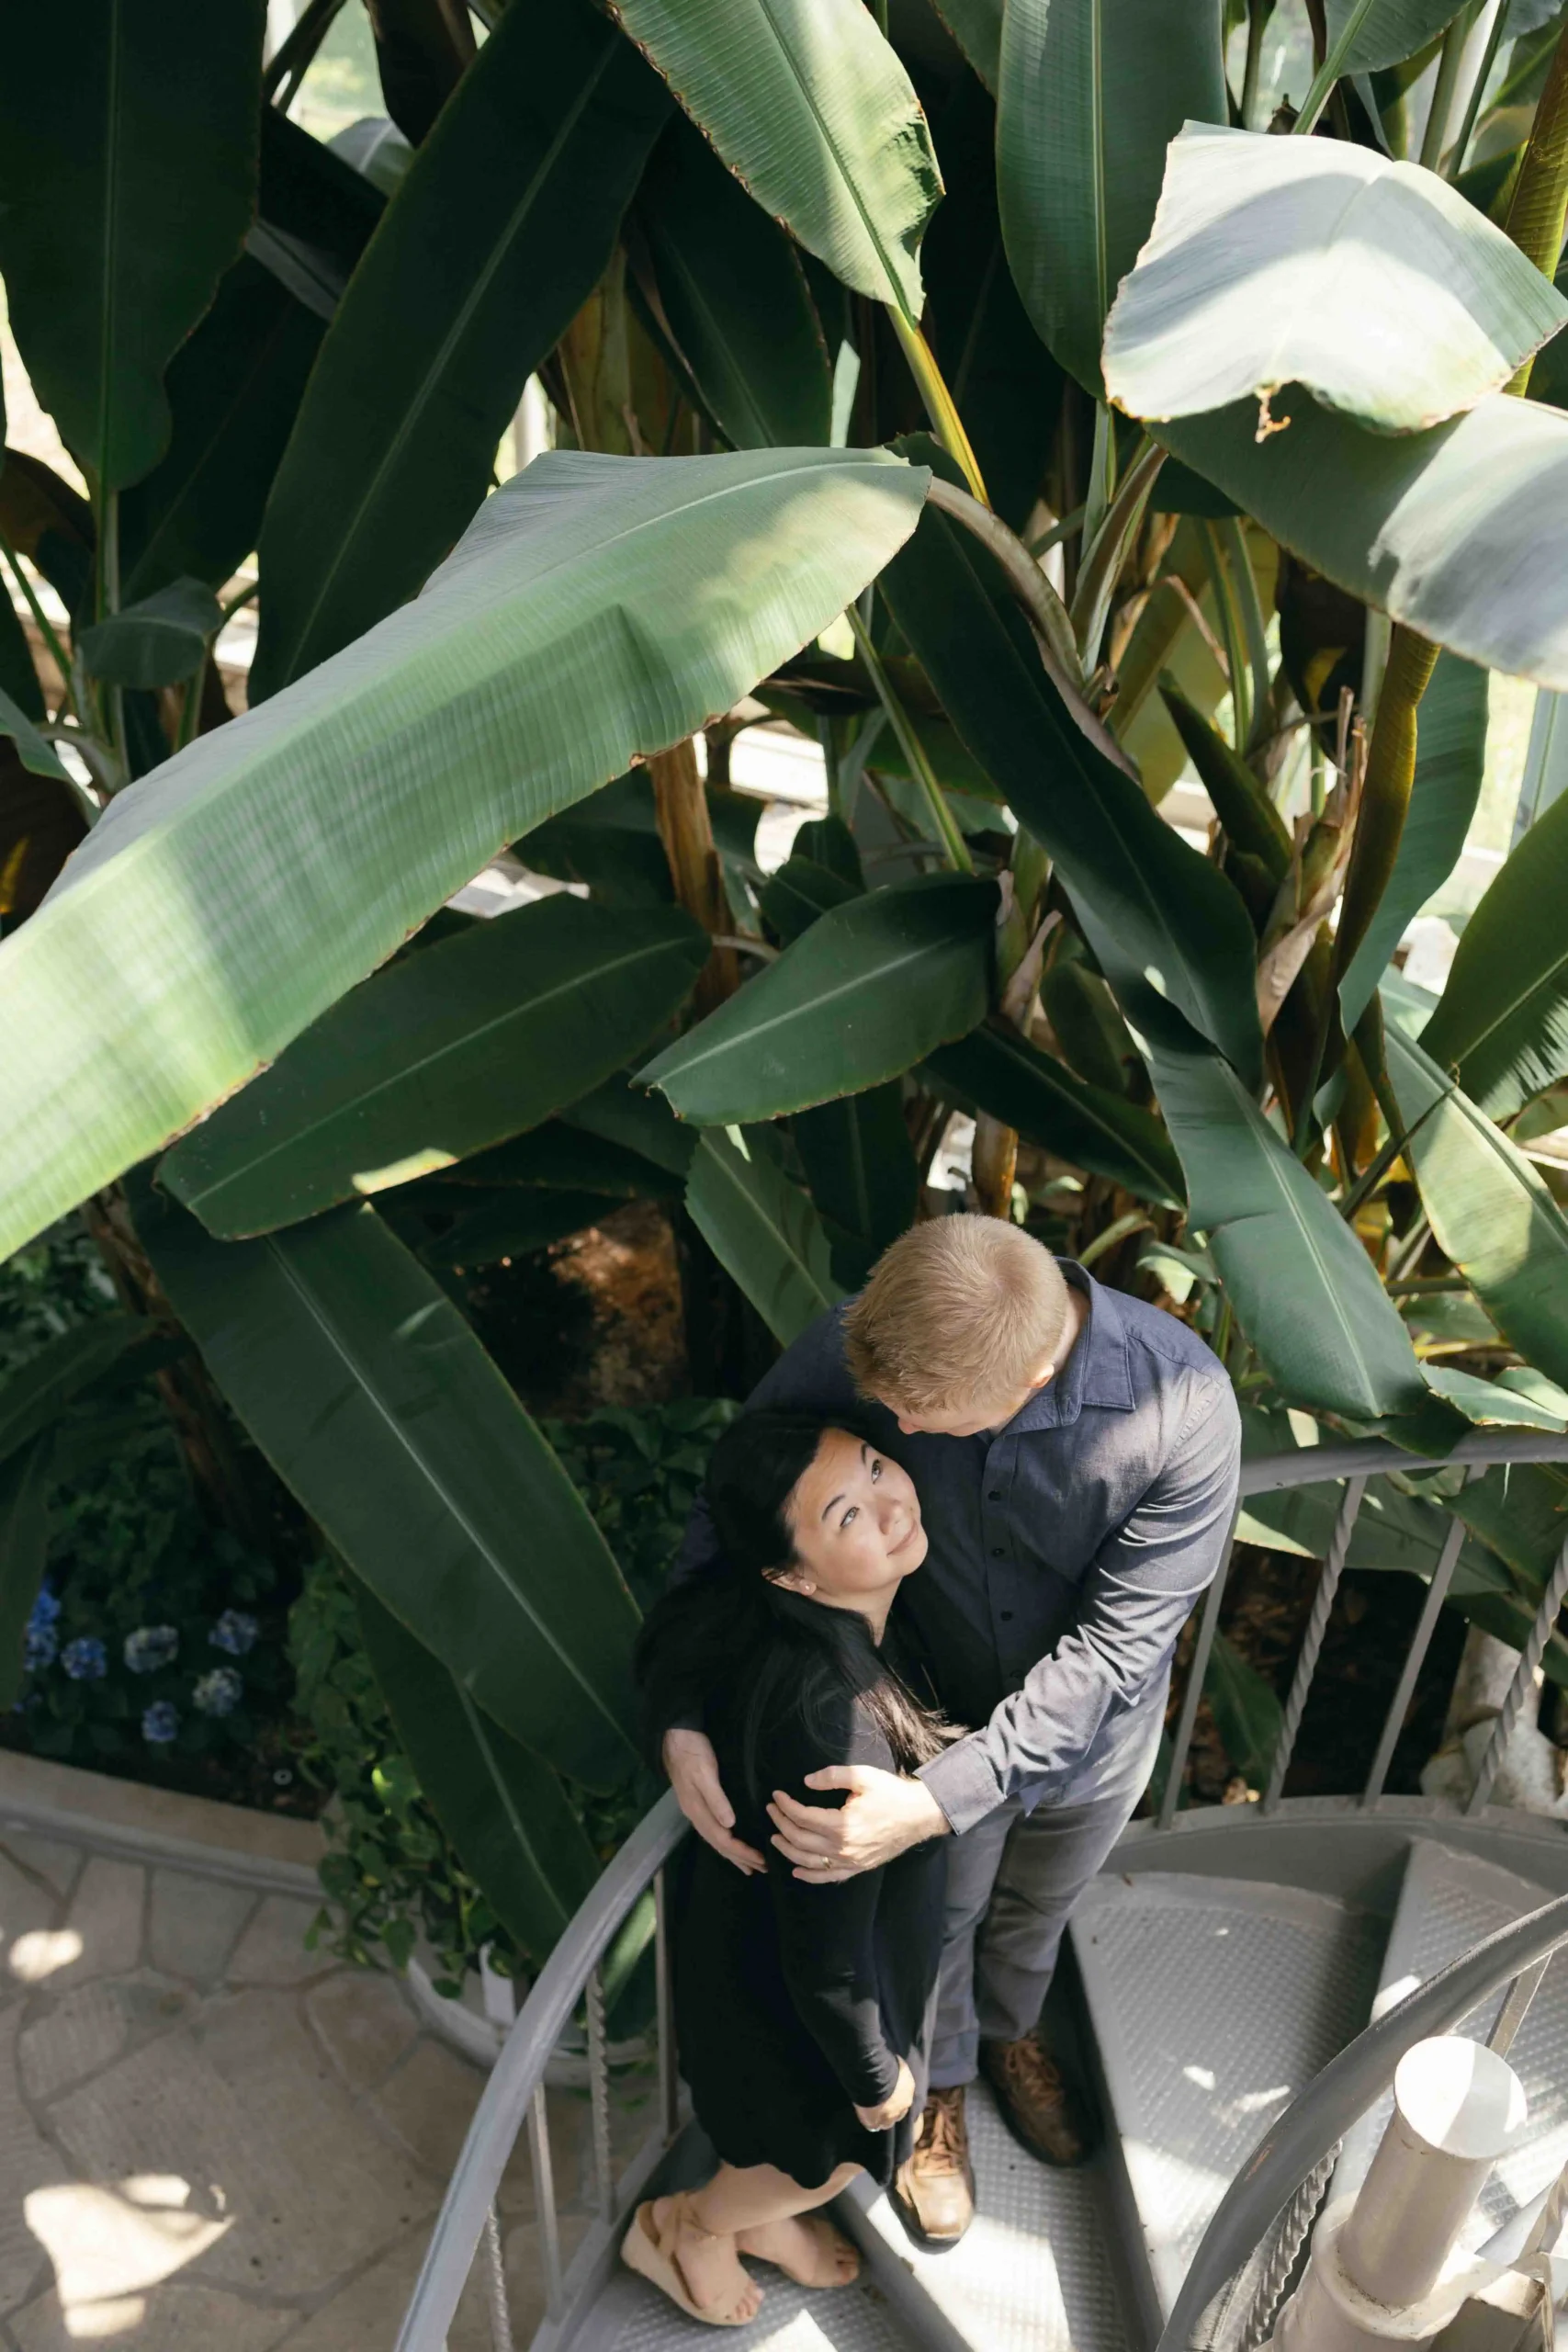 A couple embracing on a spiral staircase in a greenhouse surrounded by tropical plants, shot with a romantic, filmy vibe by Stacey Vandas Photography.